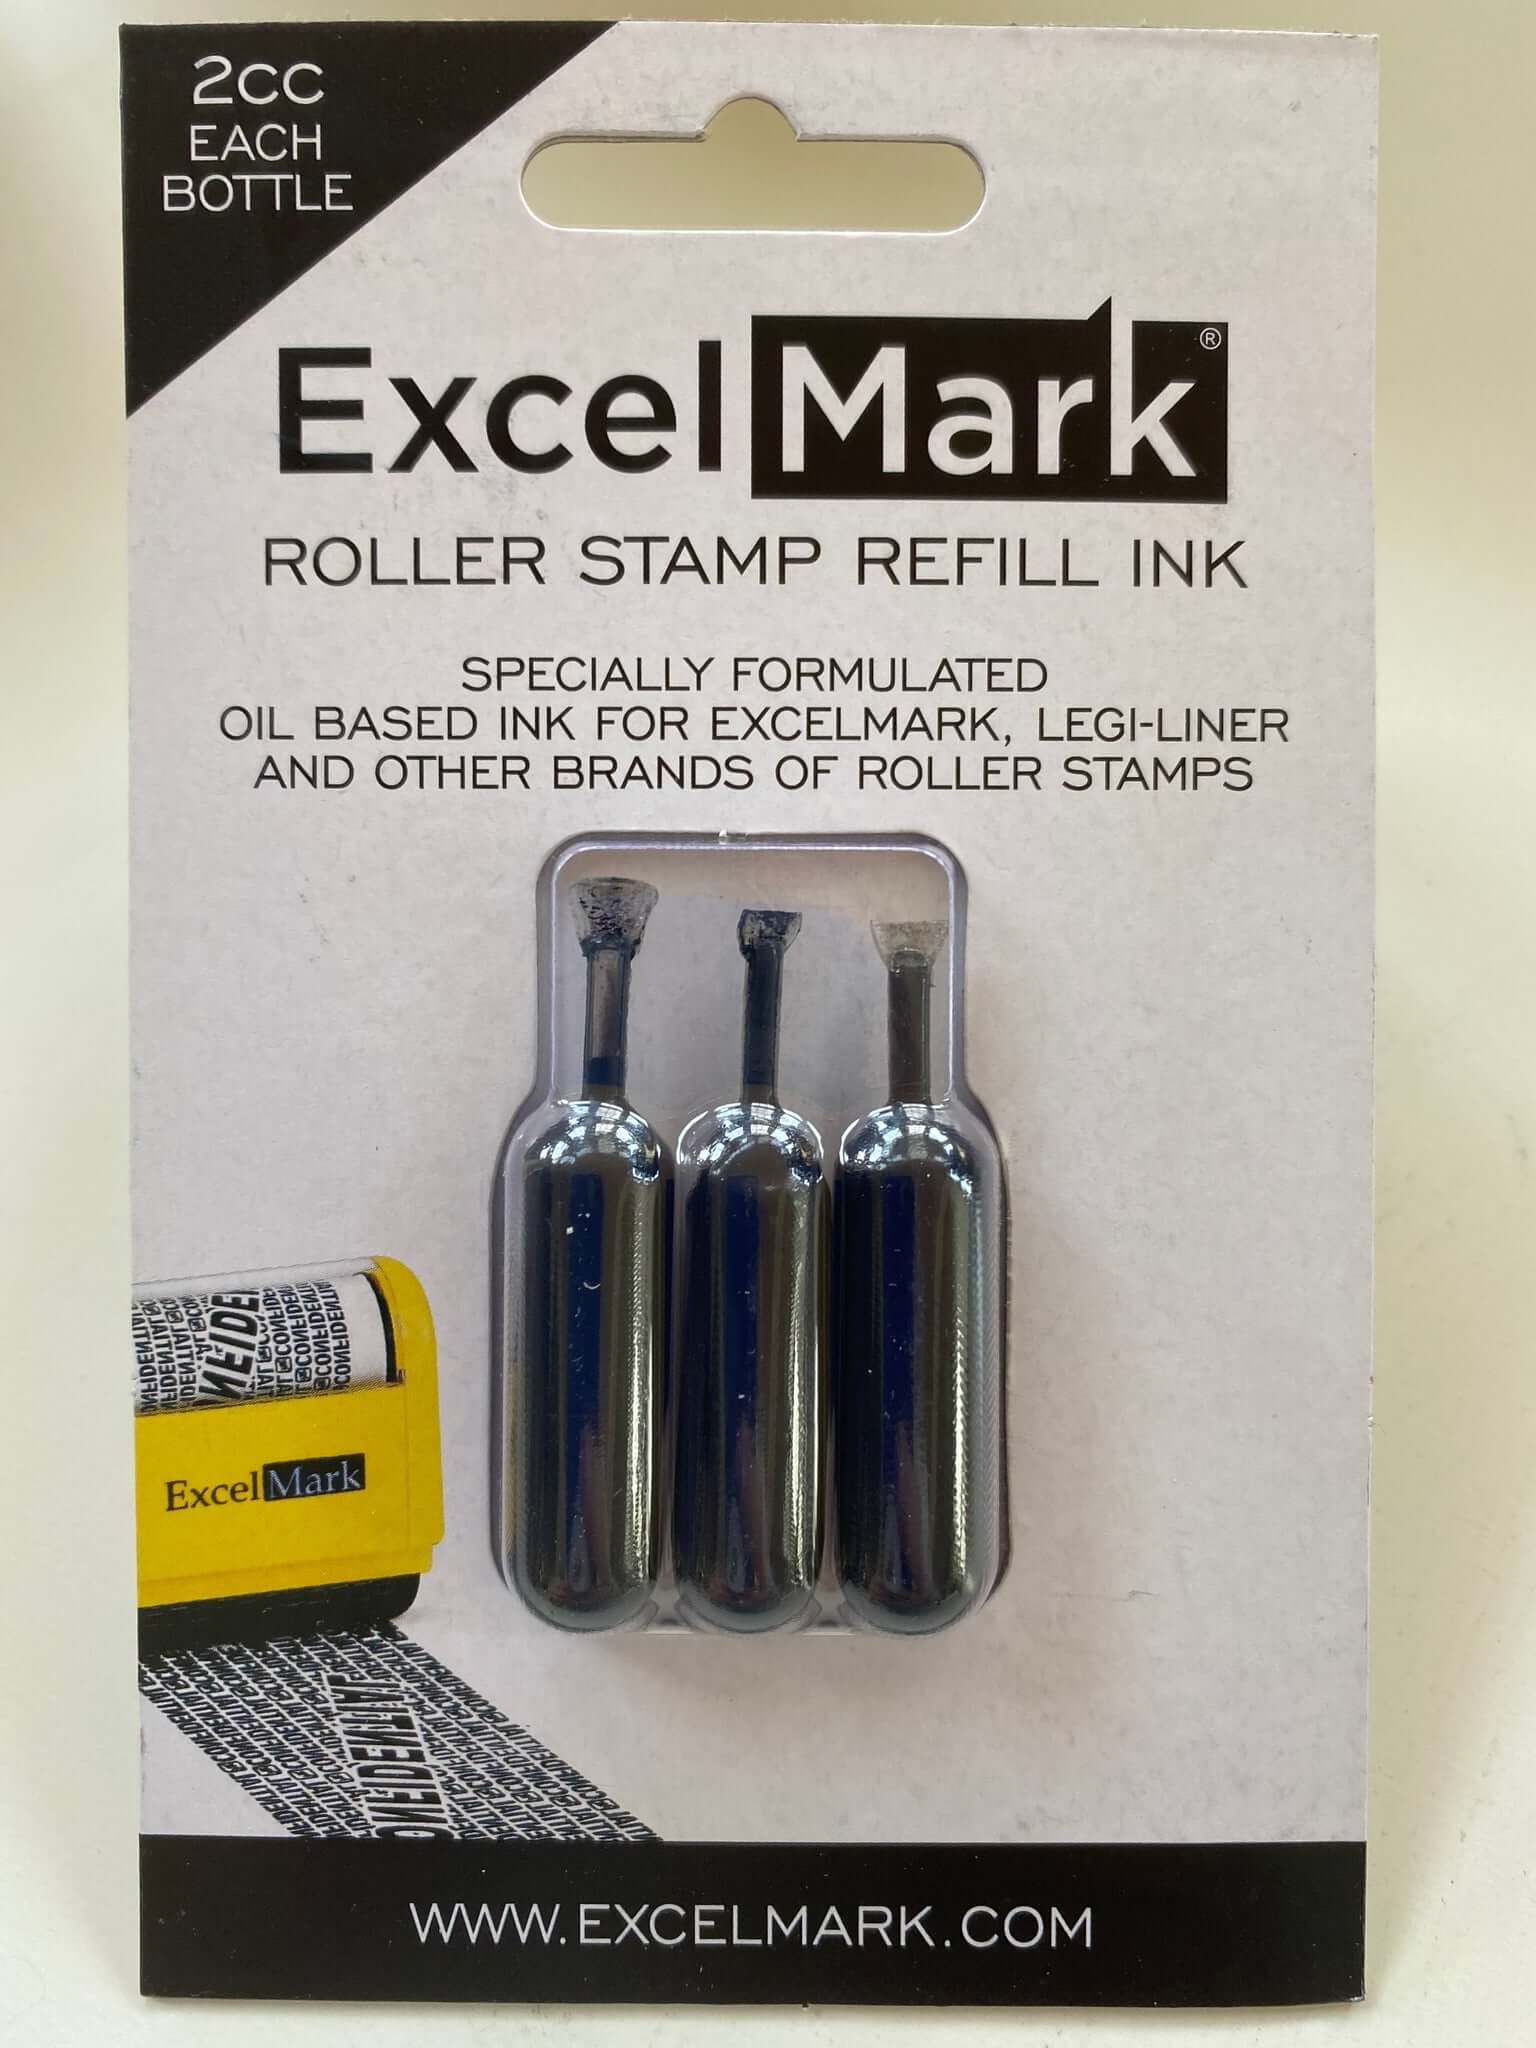 LegiLiner Roller Stamp Ink Refill Actual Packaging Front View